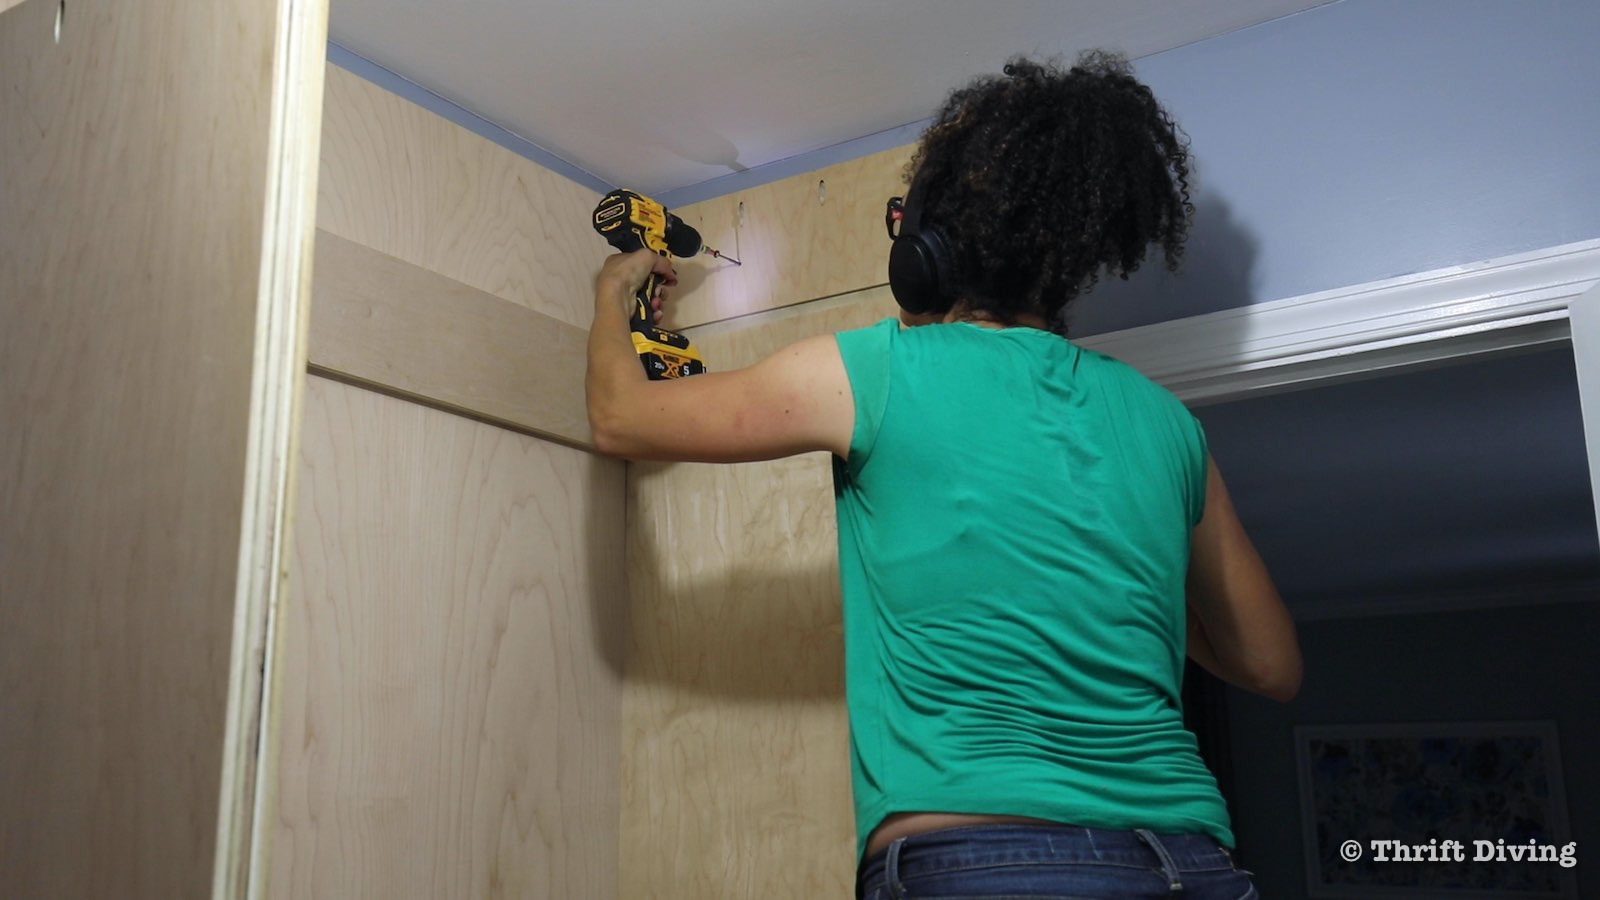 How to Build a Walk-in Closet Organizer From Scratch - Use 2-1/2" cabinet screws to secure closet organizer to studs at the top, middle, and bottom. - Thrift Diving